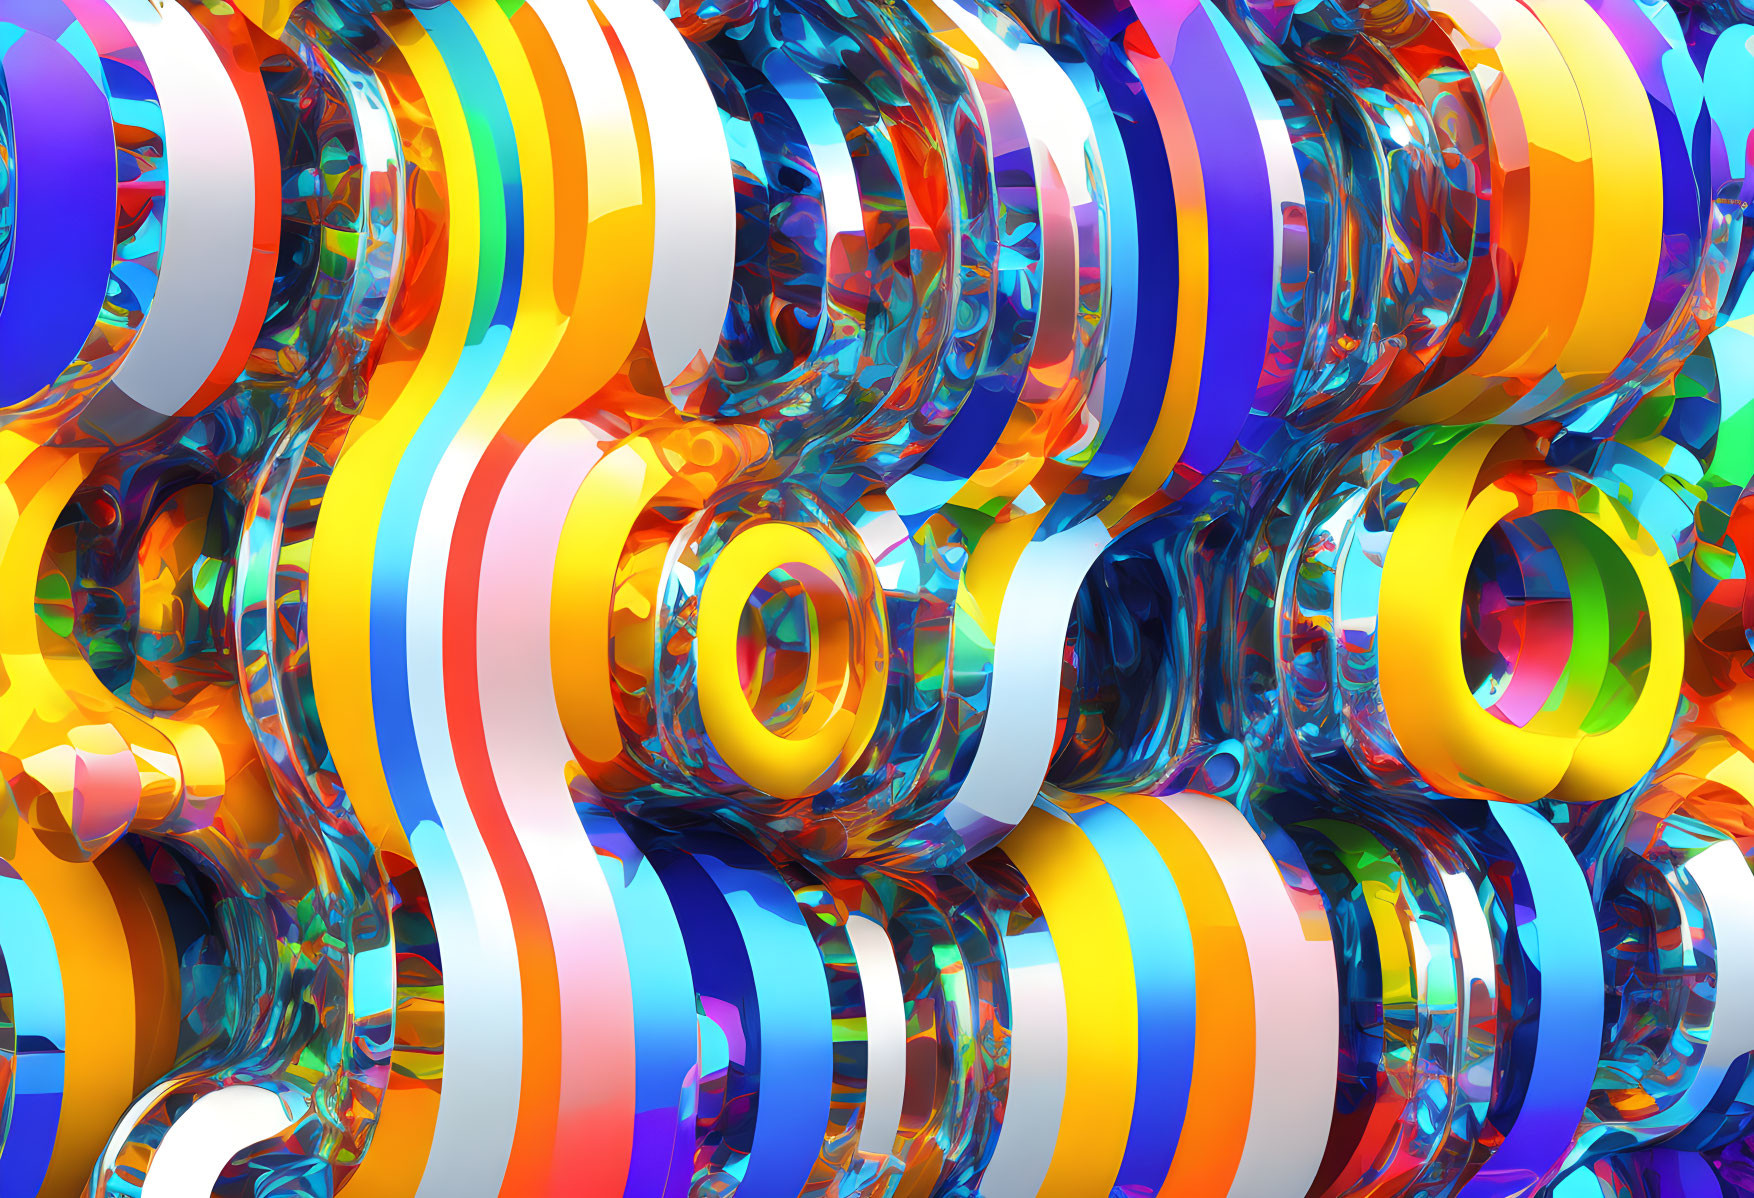 Colorful digital artwork with wavy lines and circular shapes